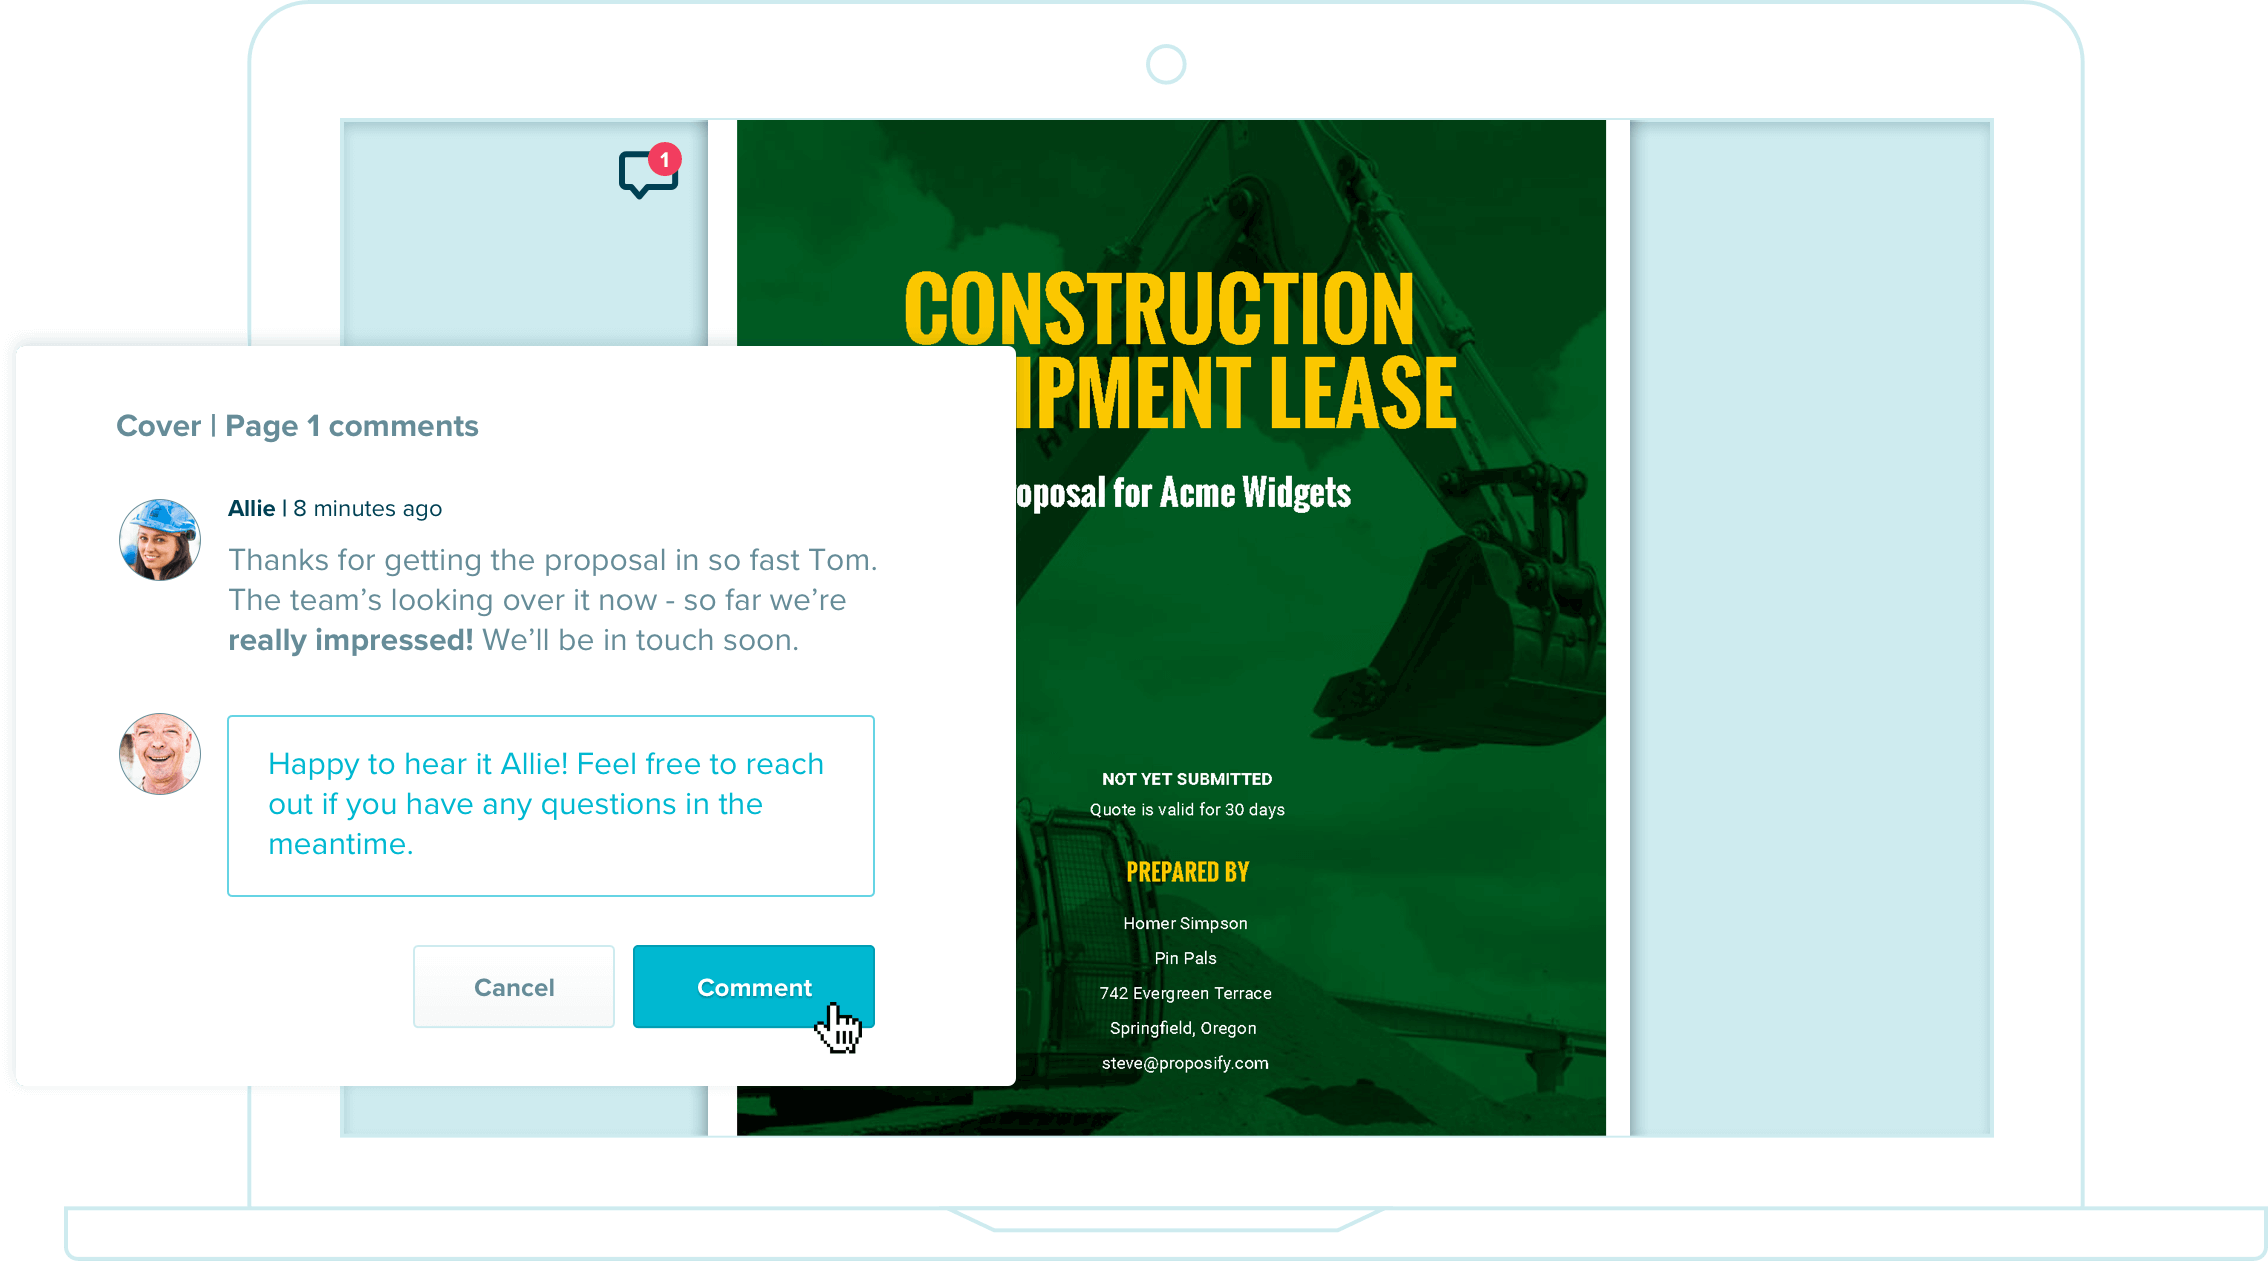 deliver an excellent construction proposal experience